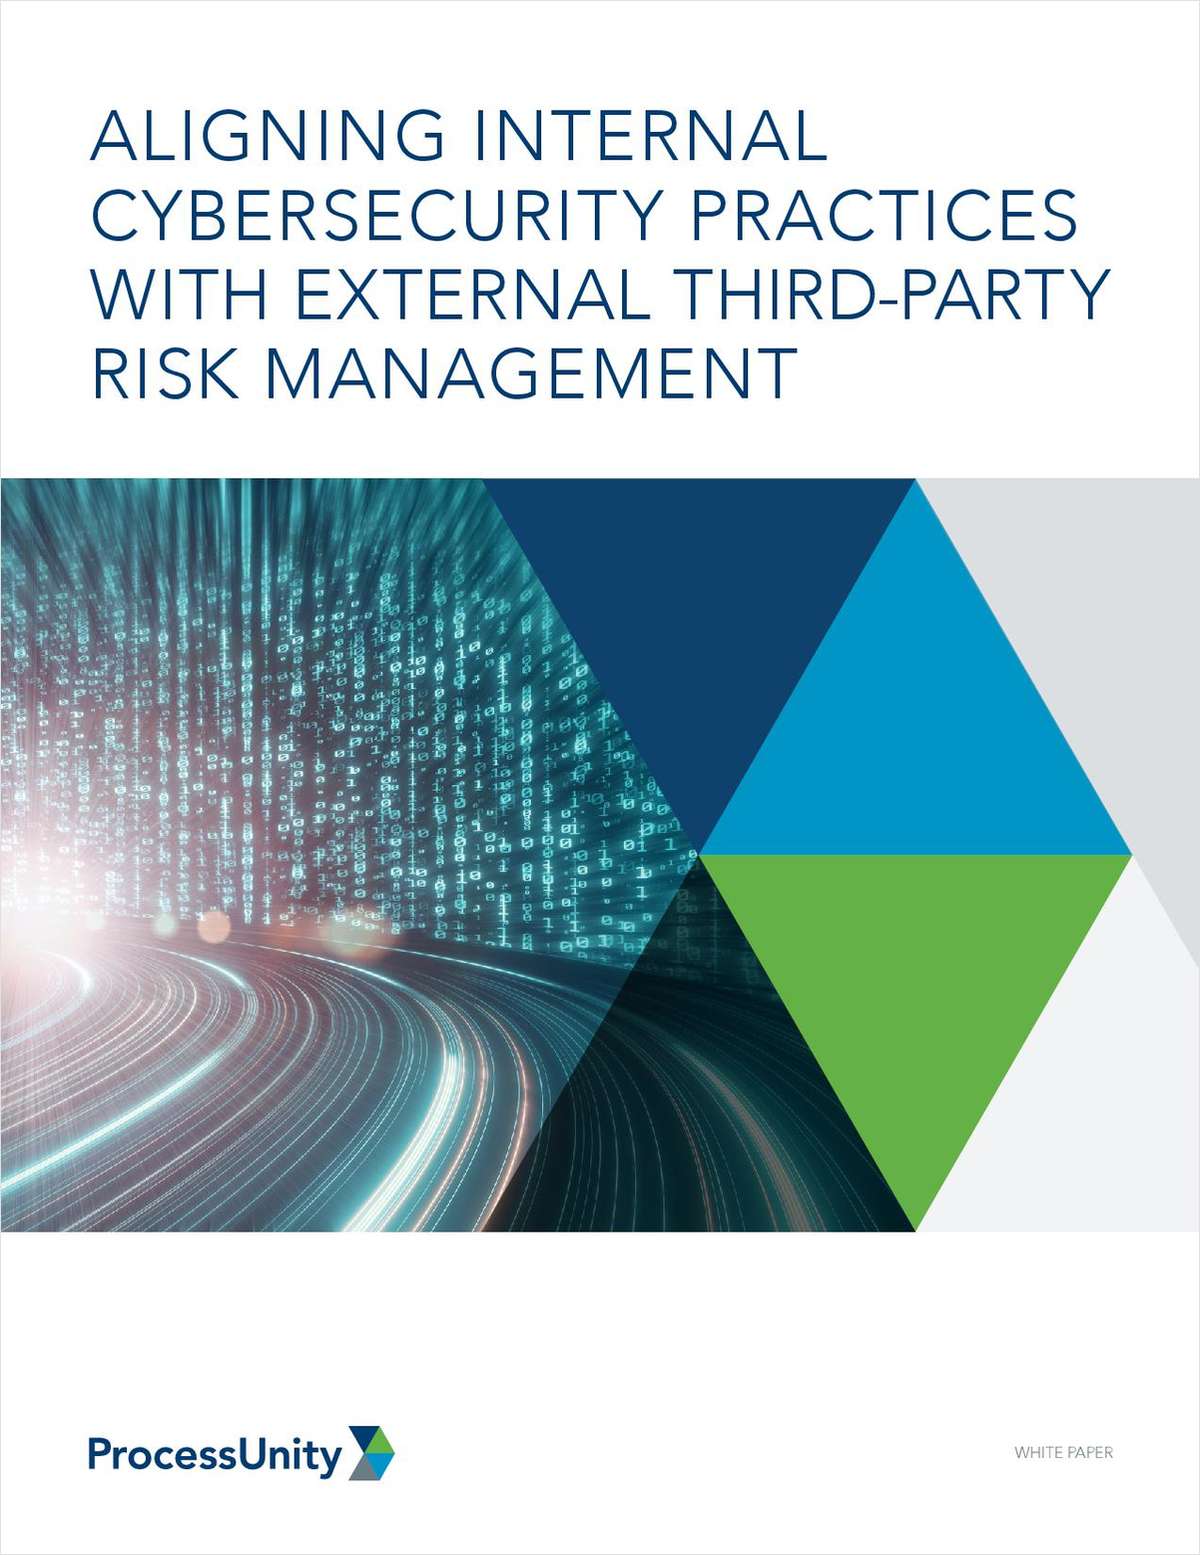 Aligning Internal Cybersecurity Practices with External Third-Party Risk Management